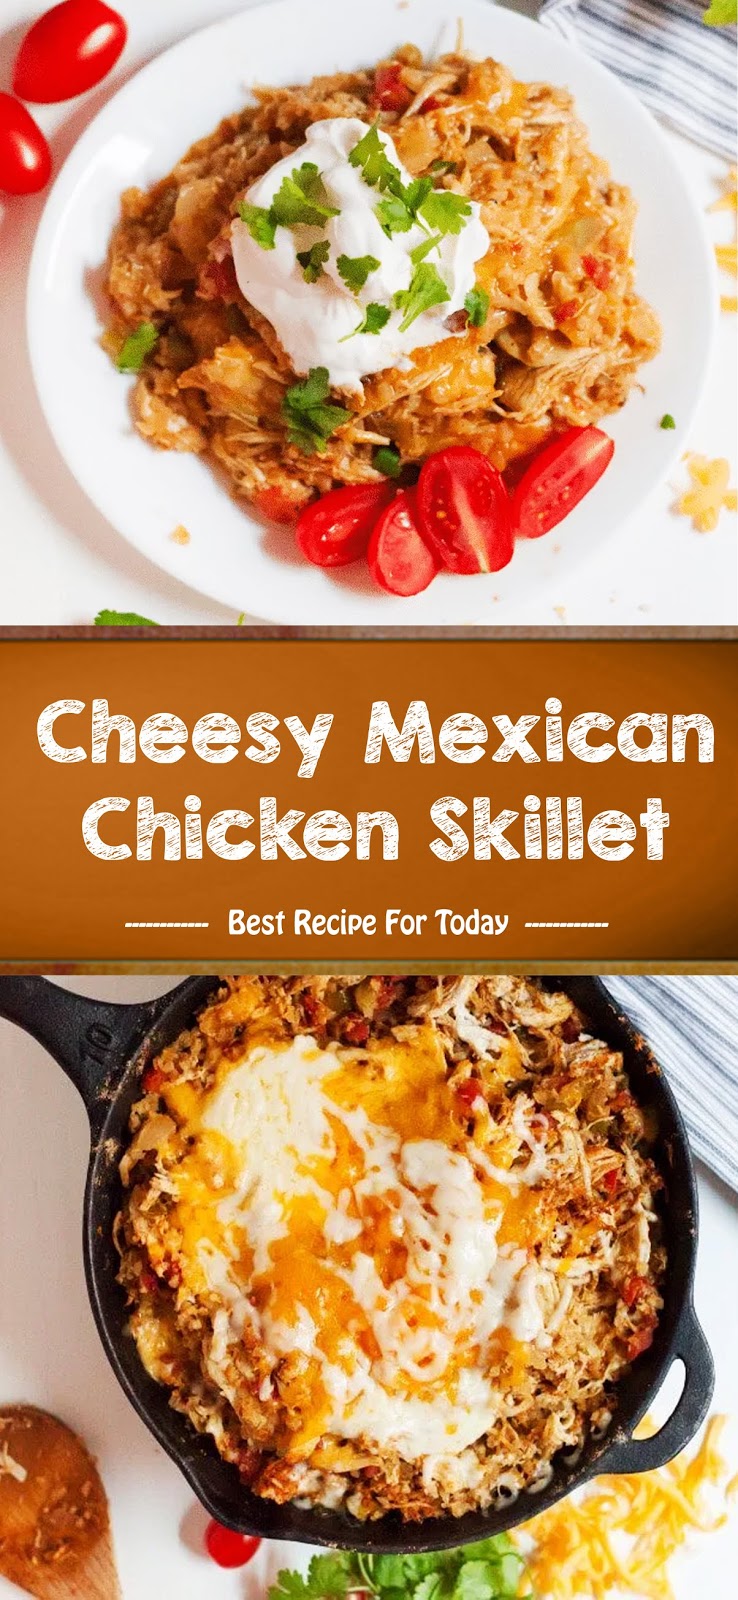 Cheesy Mexican Chicken Skillet